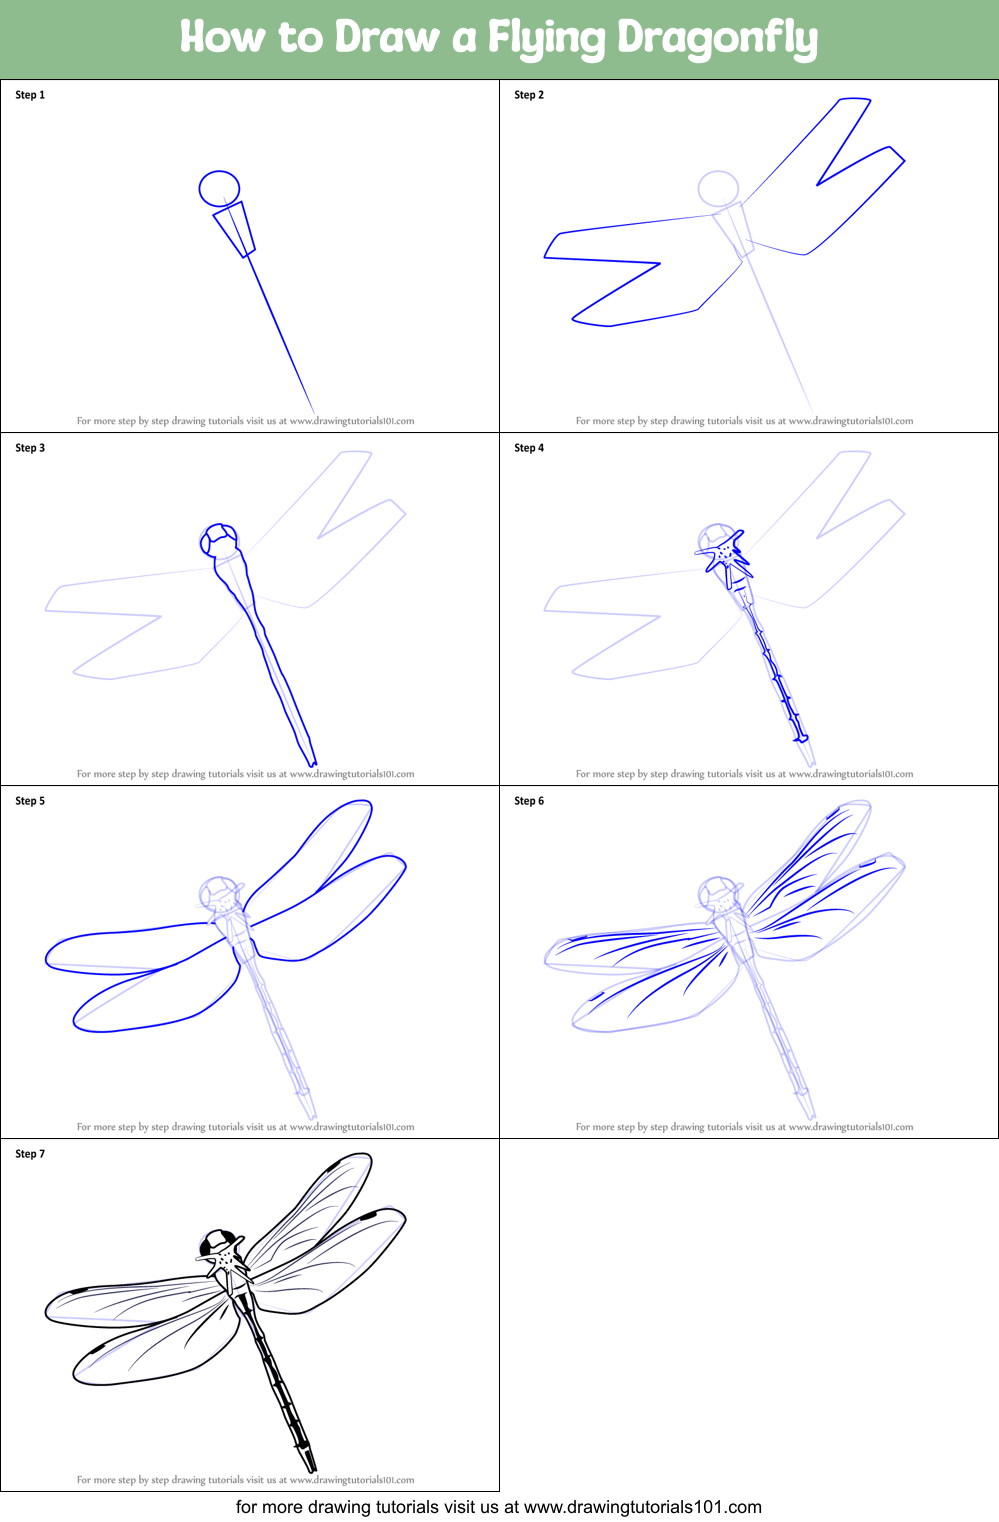 How to Draw a Flying Dragonfly (Insects) Step by Step